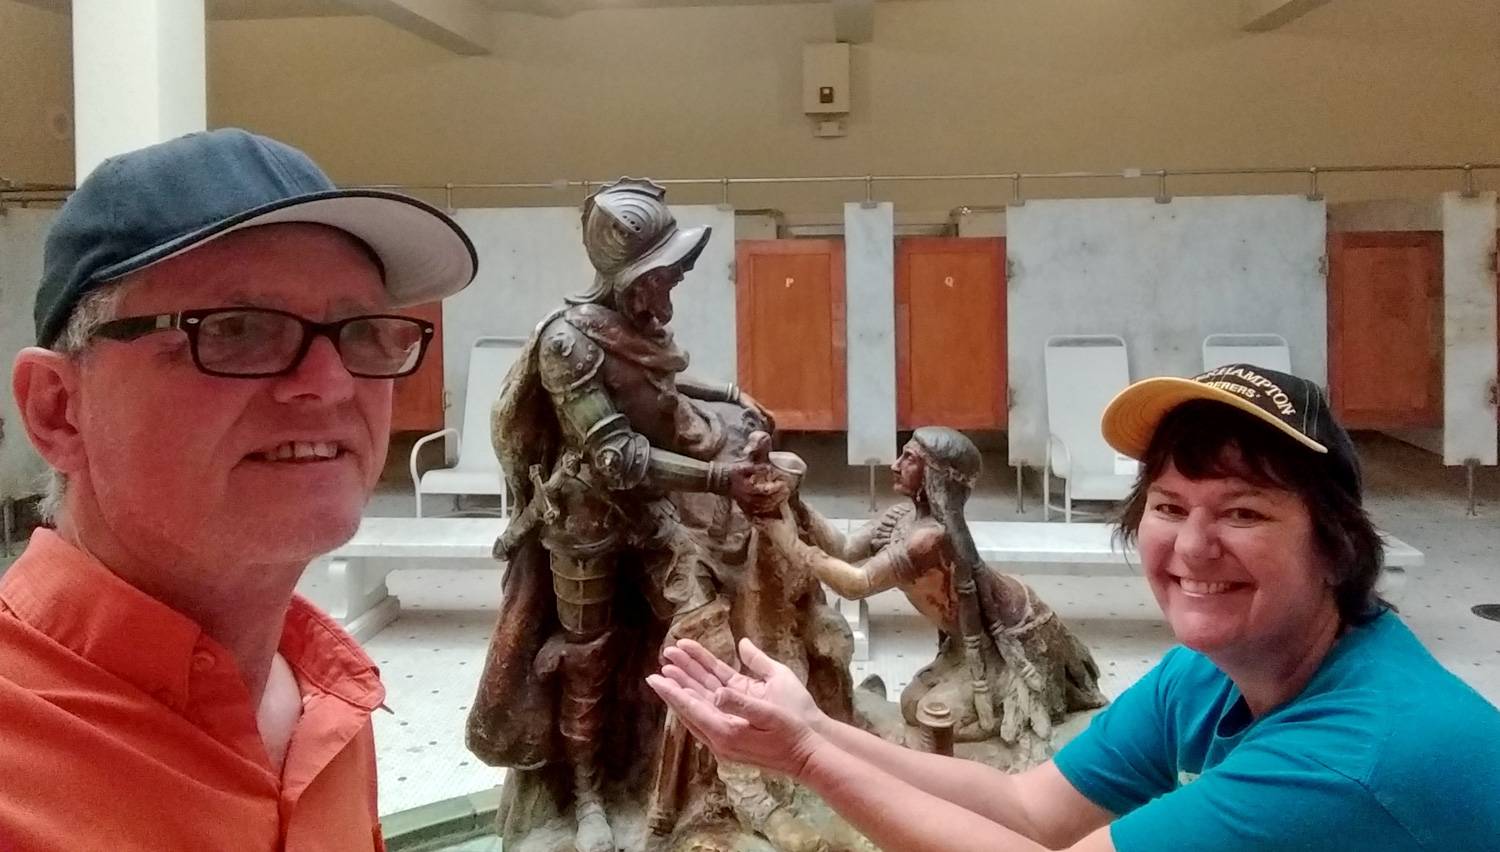 AJ imitiates the woman in the statue, holding supped hands and begging for the fountain of youth liquid.